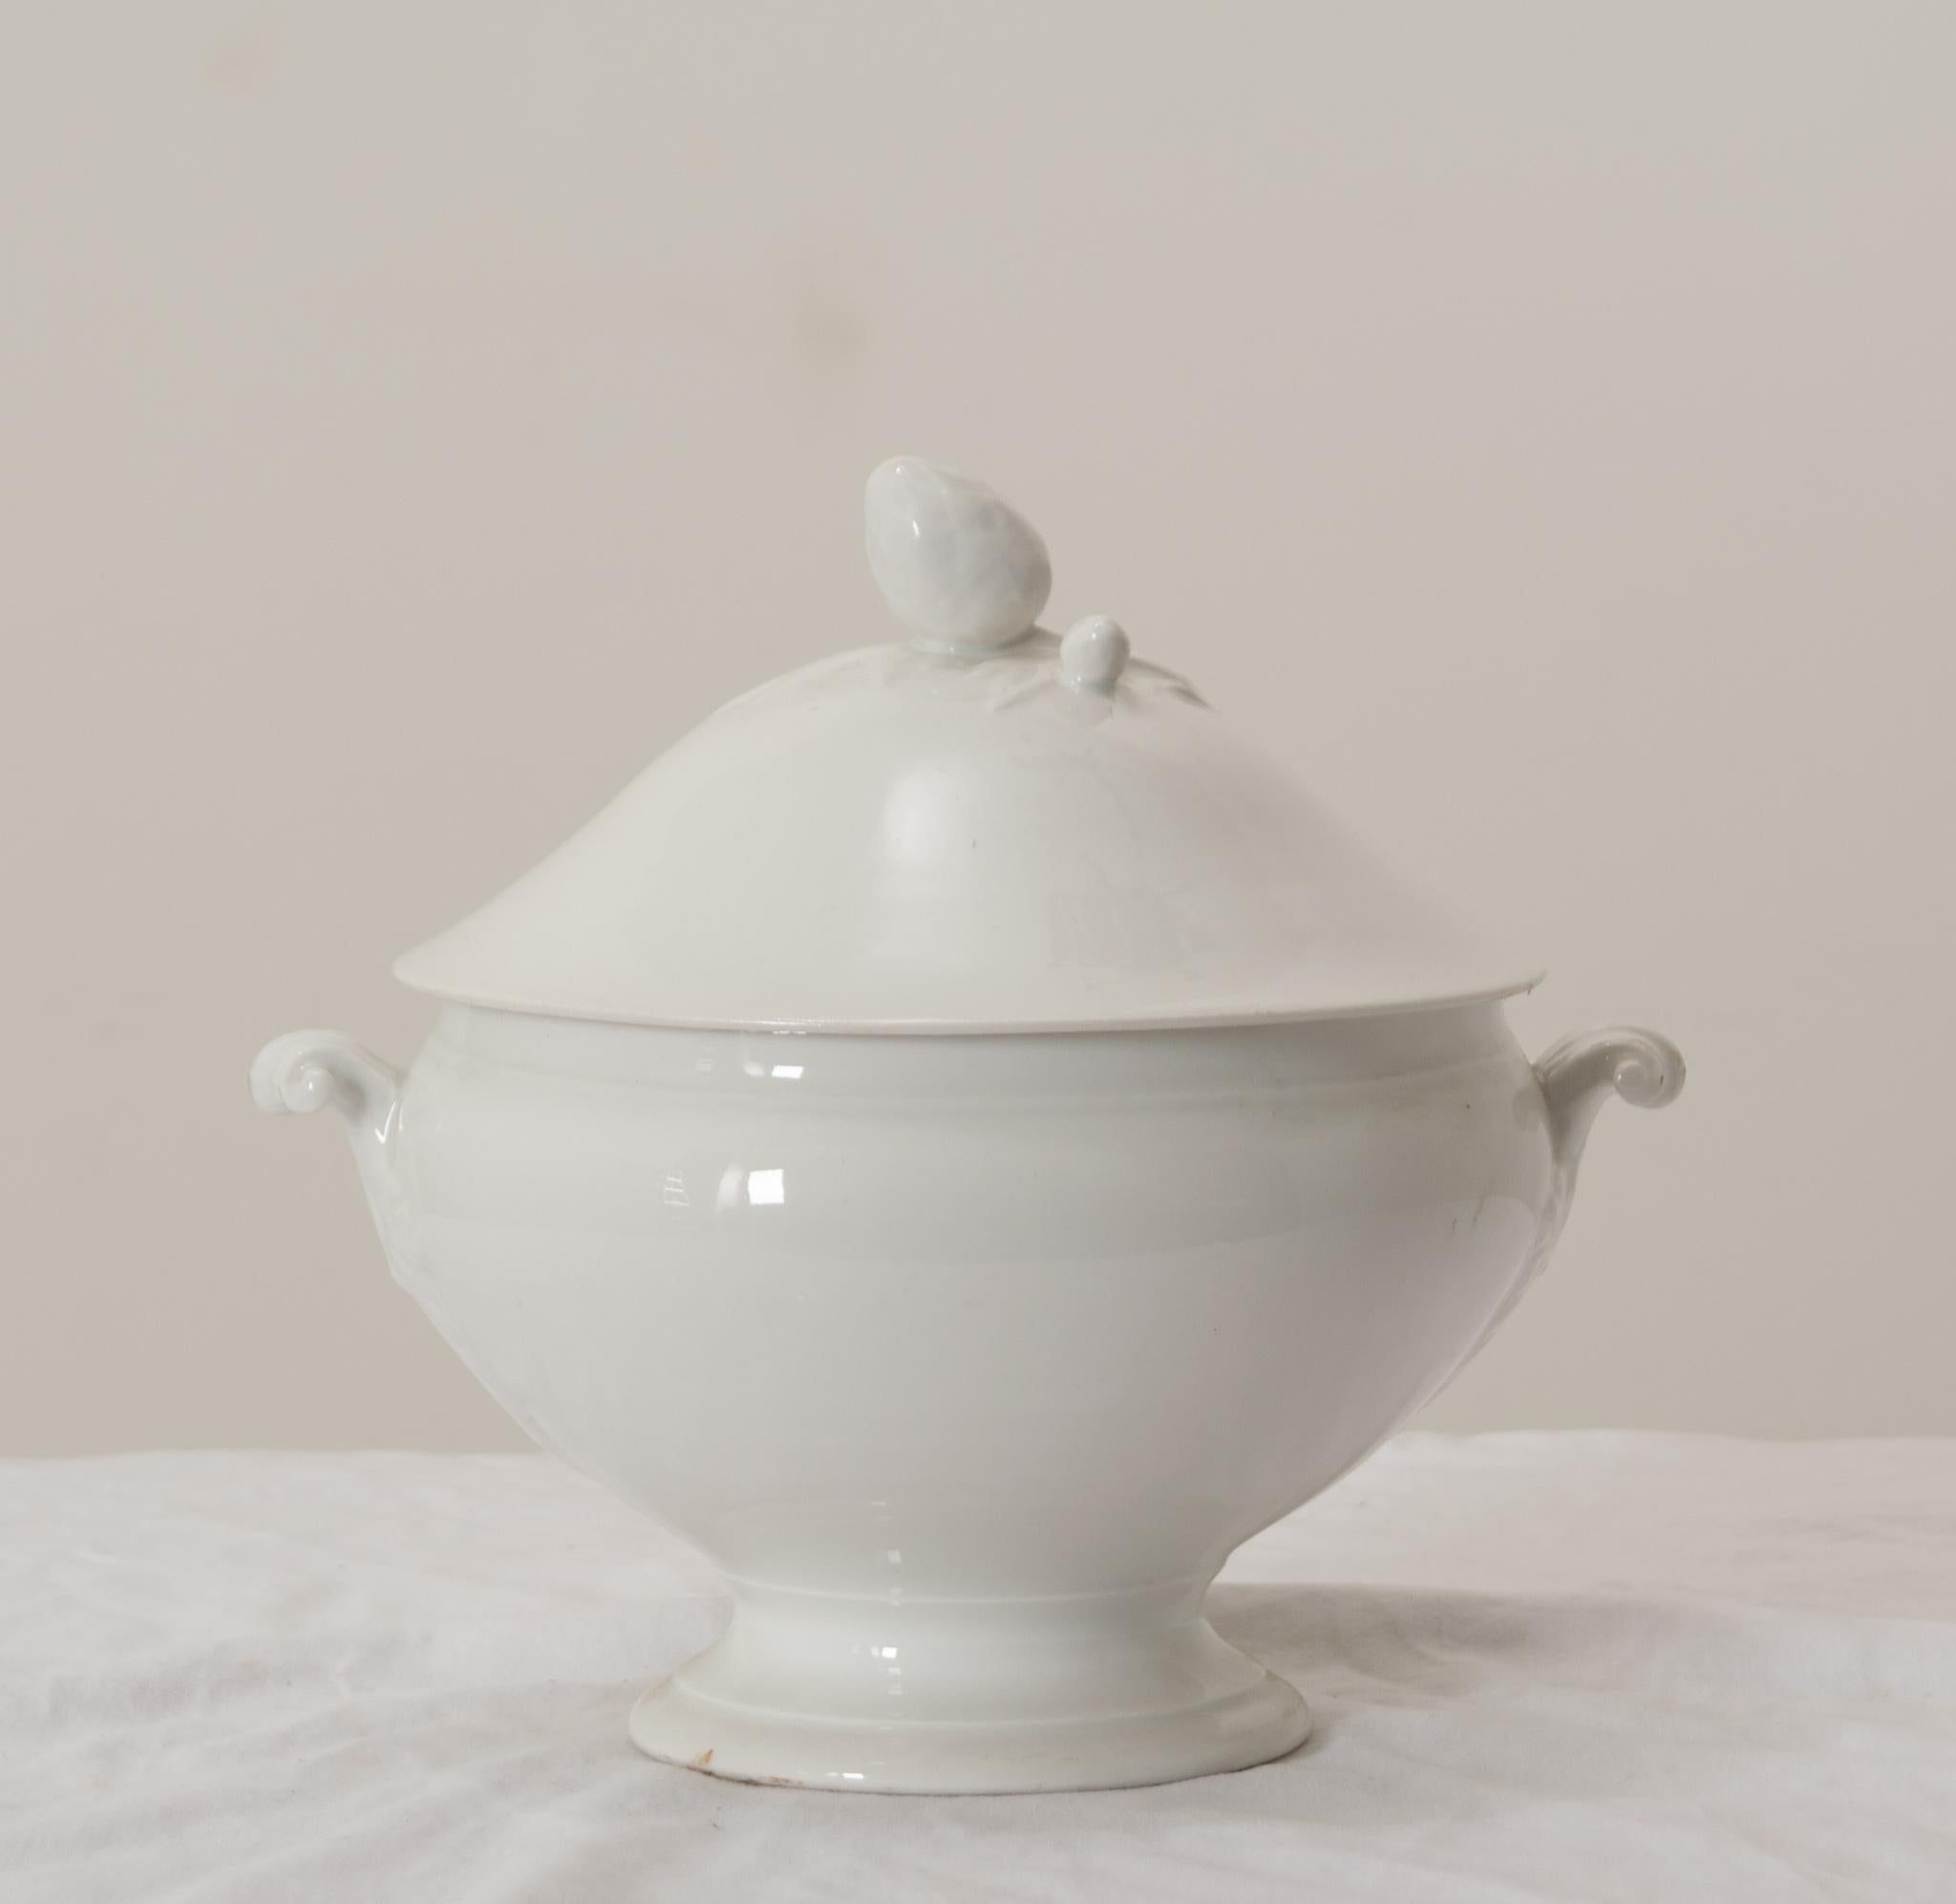 A gorgeous antique French white porcelain lidded soup tureen with pedestal base, perfect for serving soups, stews, and gumbos.This fine soup tureen has a decorative conical finial on the lid, lovely ornate scrolling handles, foliate motifs on the